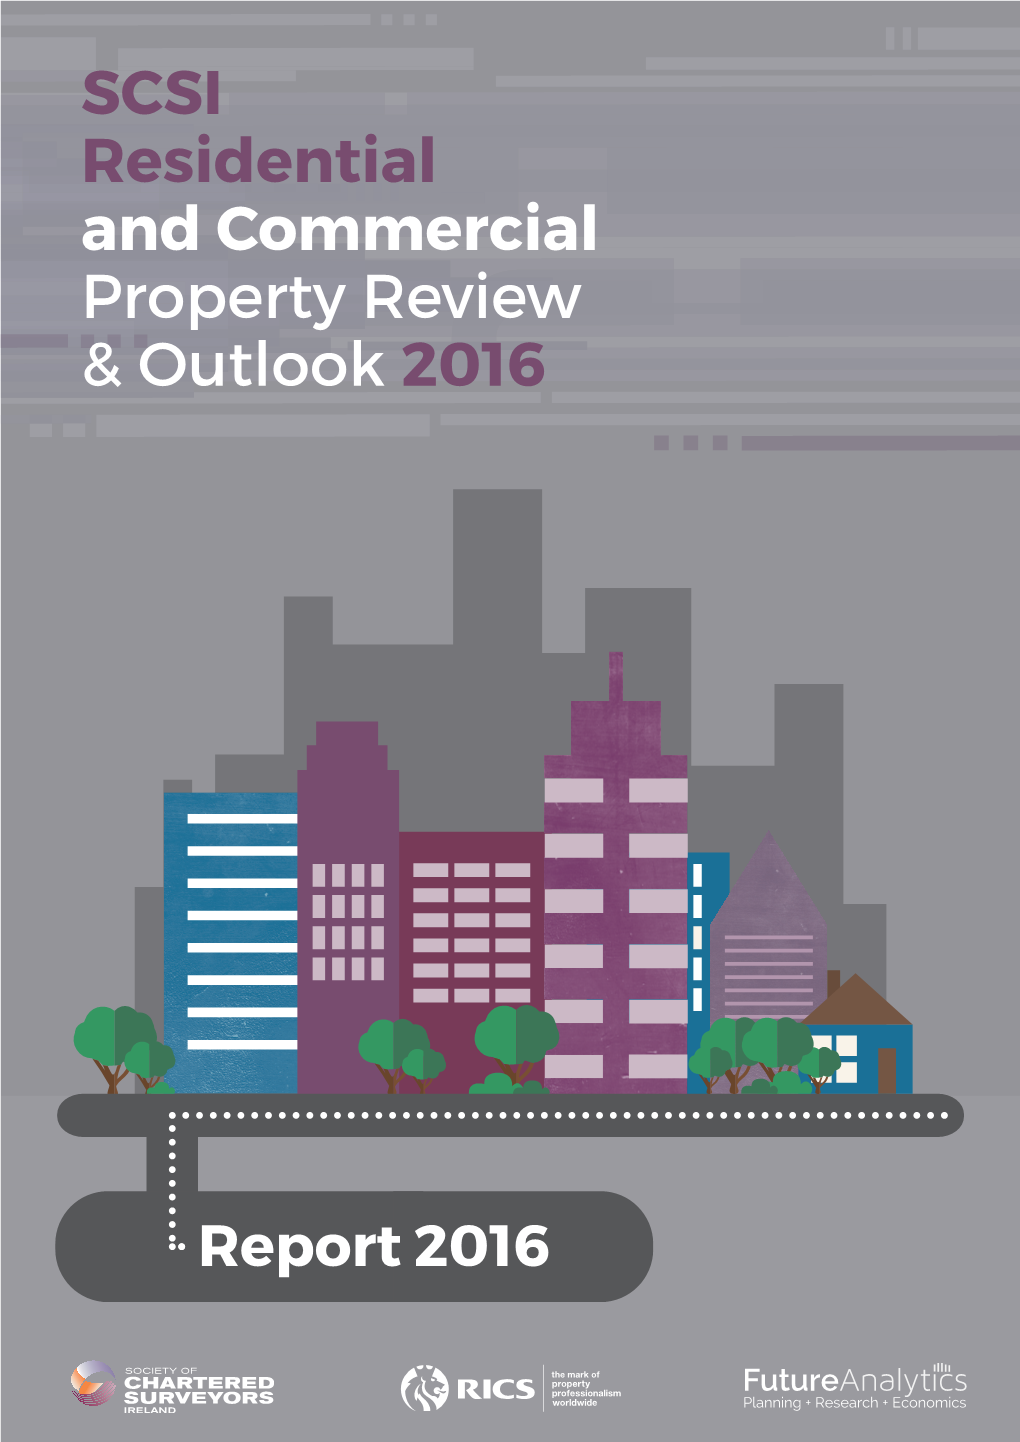 SCSI Residential and Commercial Property Review & Outlook 2016